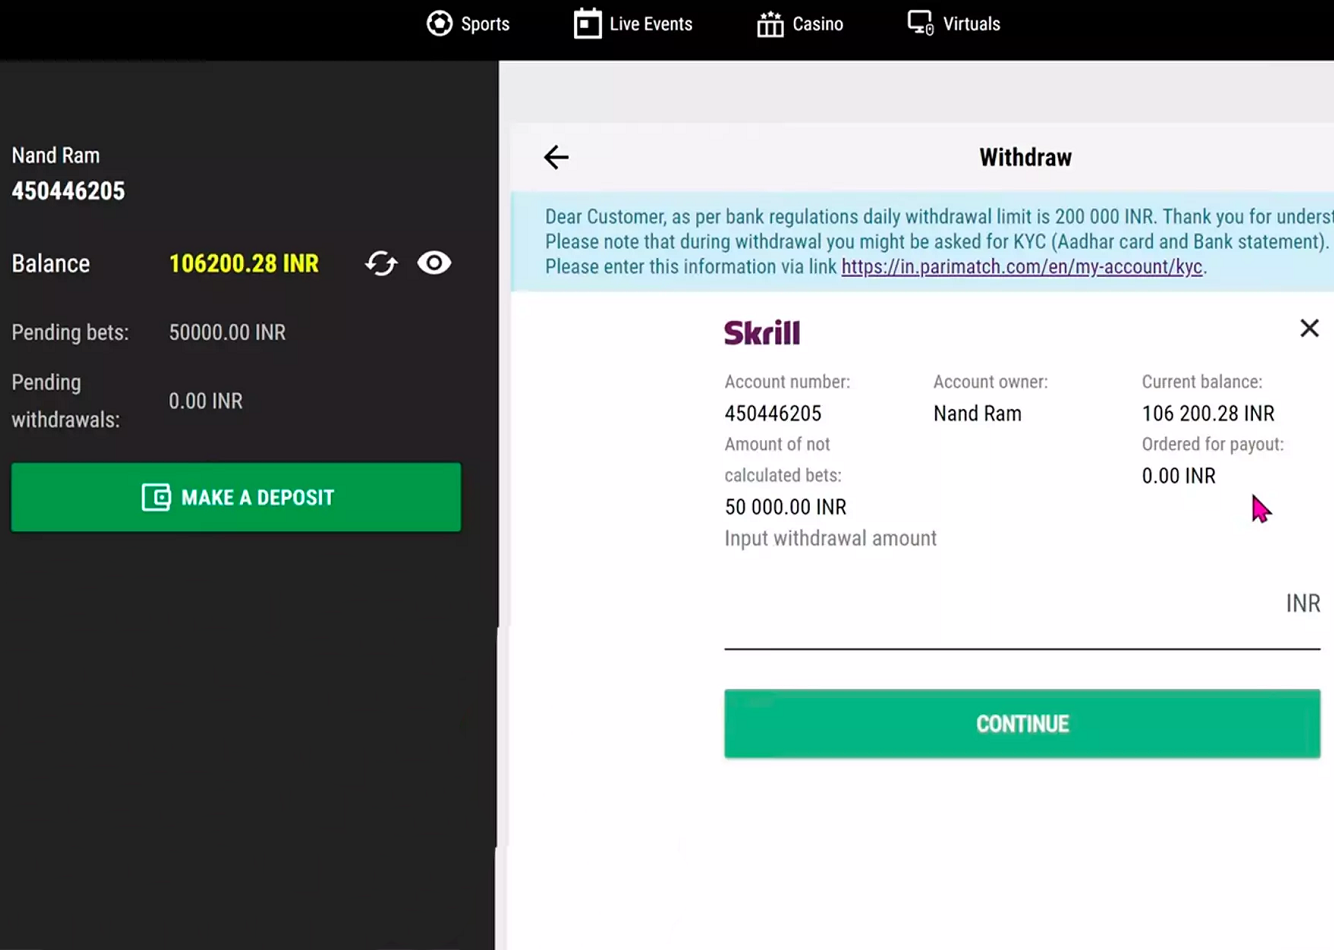 Withdrawal interface on Parimatch with Skrill selected, showing balance details